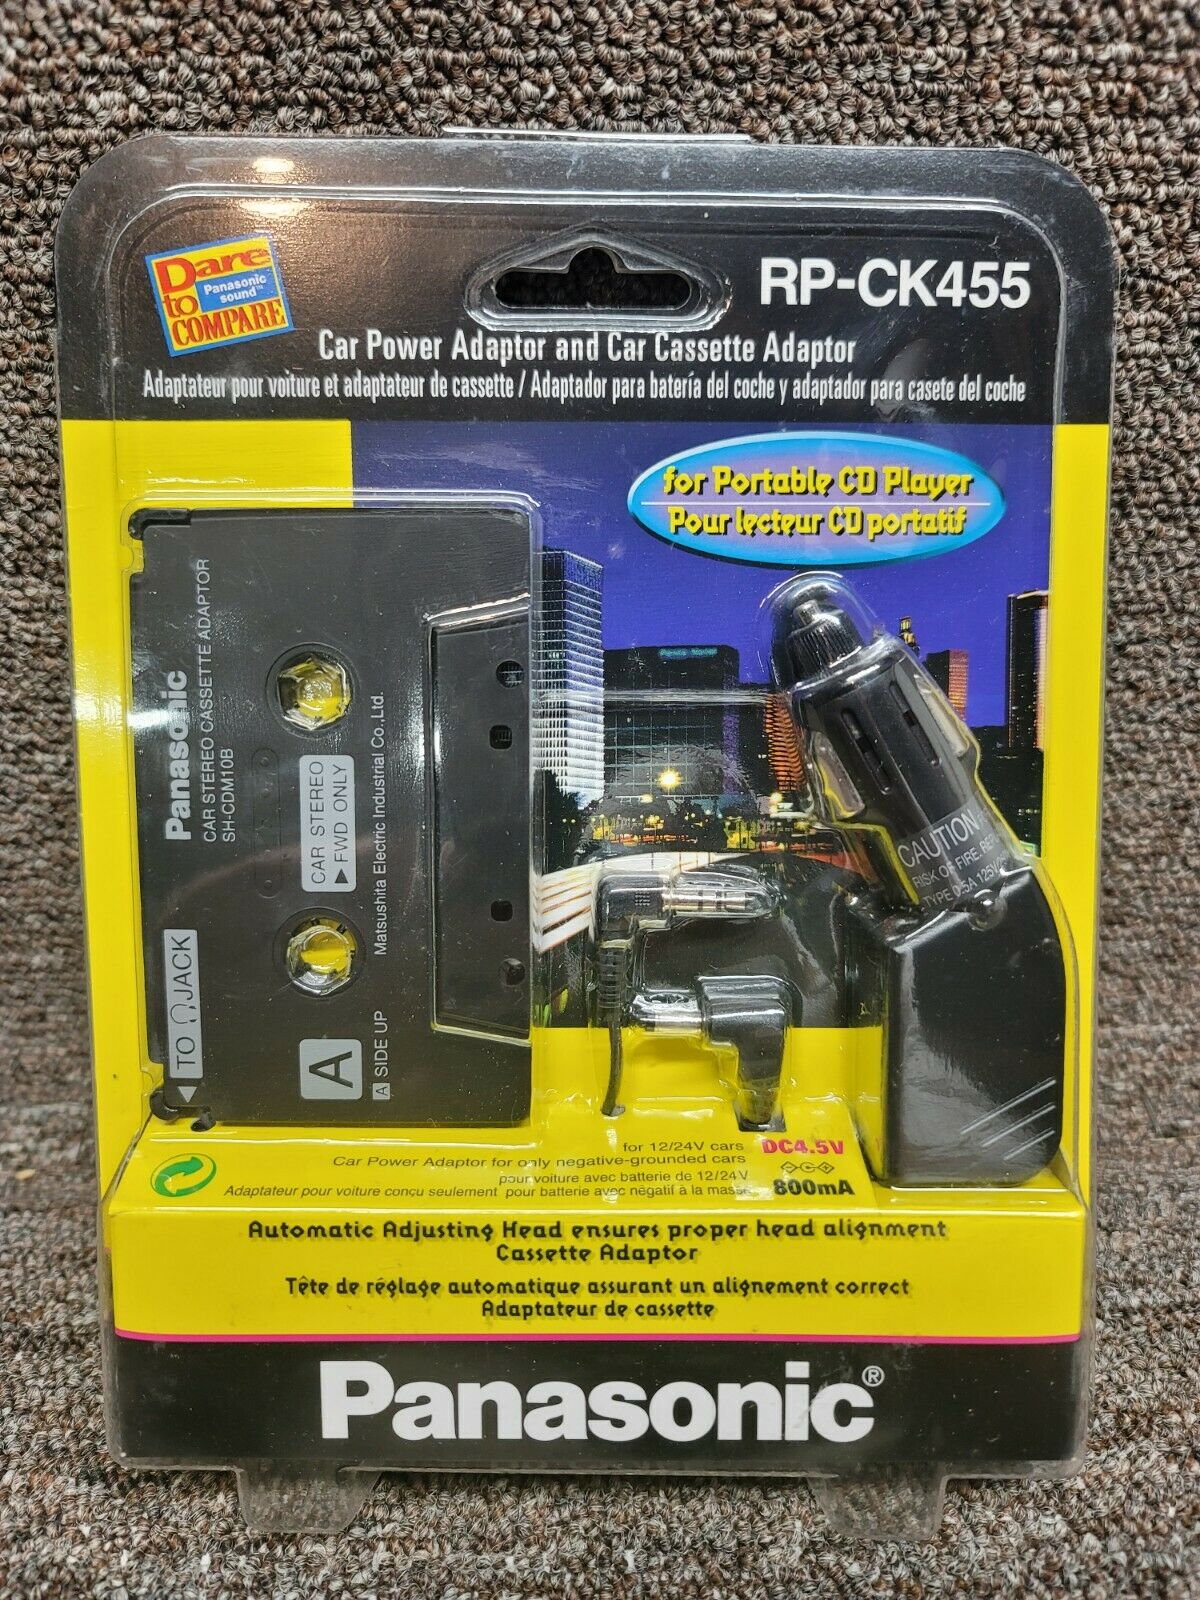 Panasonic Rp-ck455 Car Power Adaptor And Car Stereo Cassette Adapter New Sealed